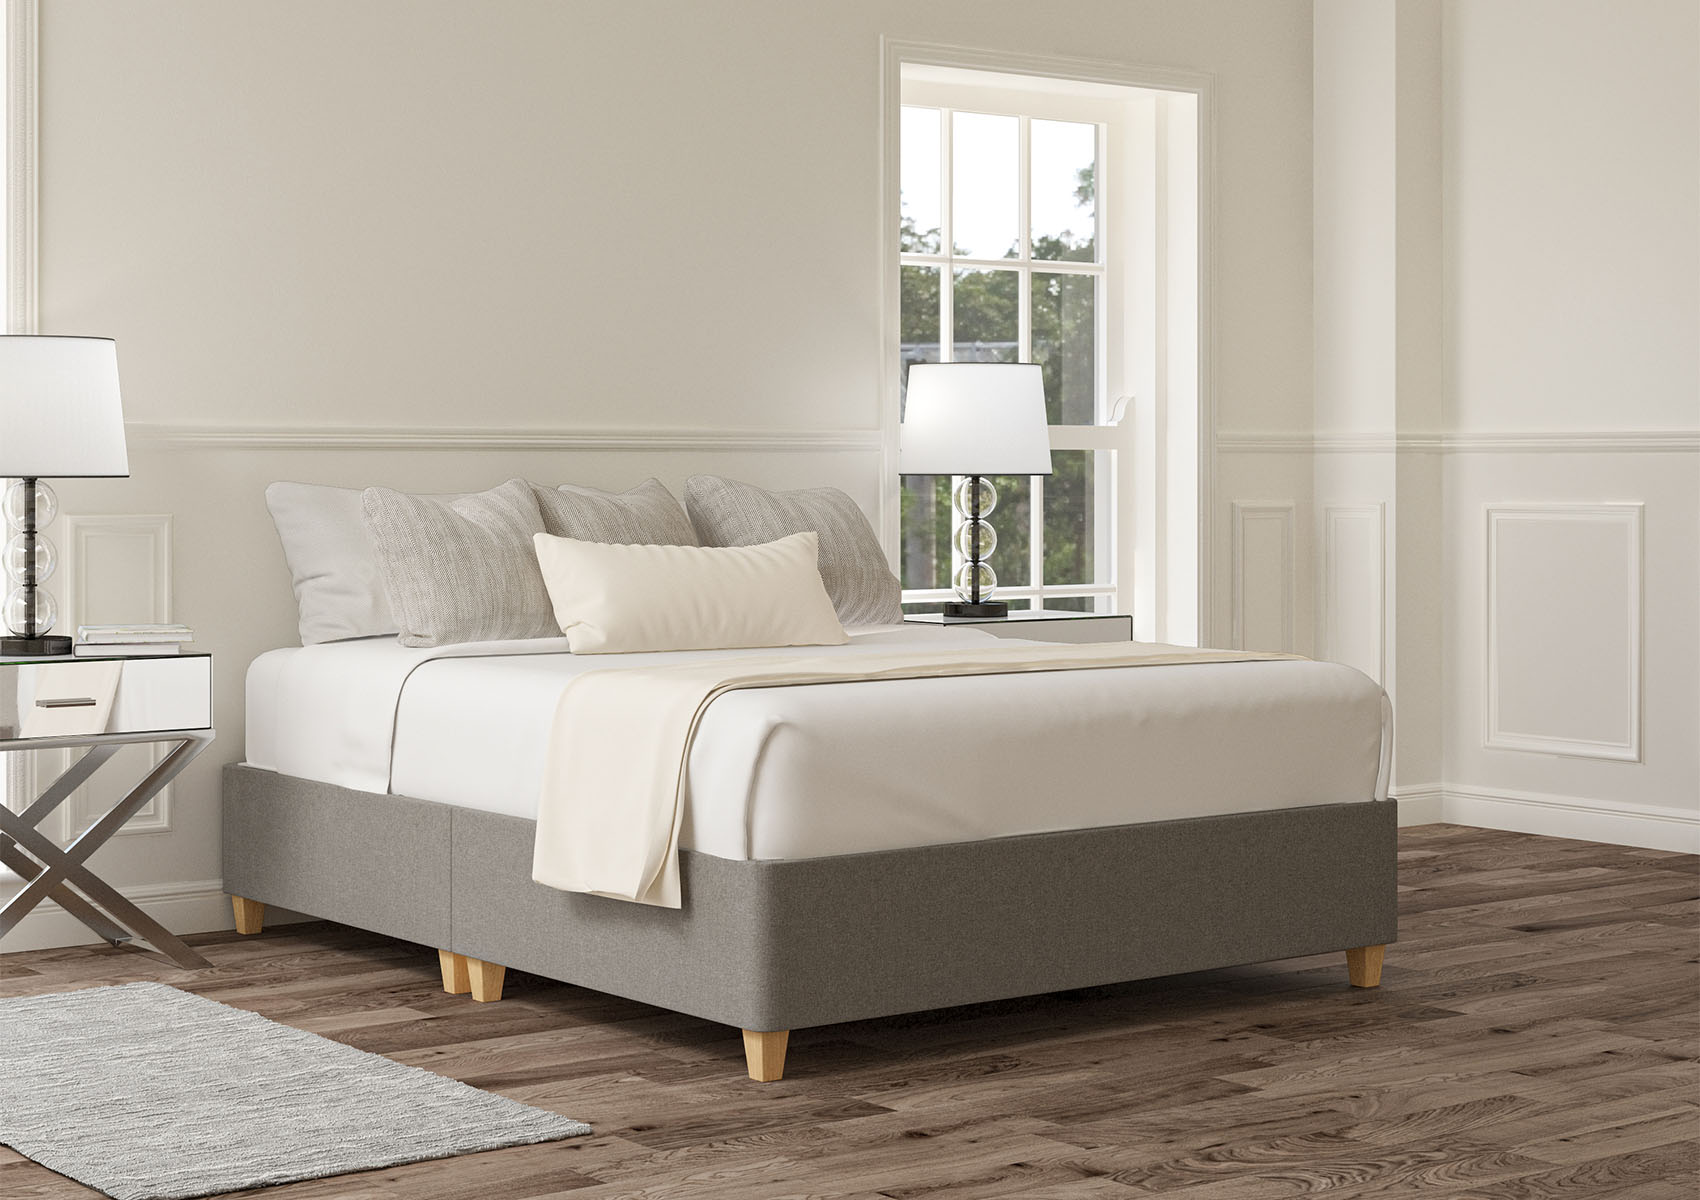 View Shallow Naples Cream Upholstered King Size Bed Time4Sleep information